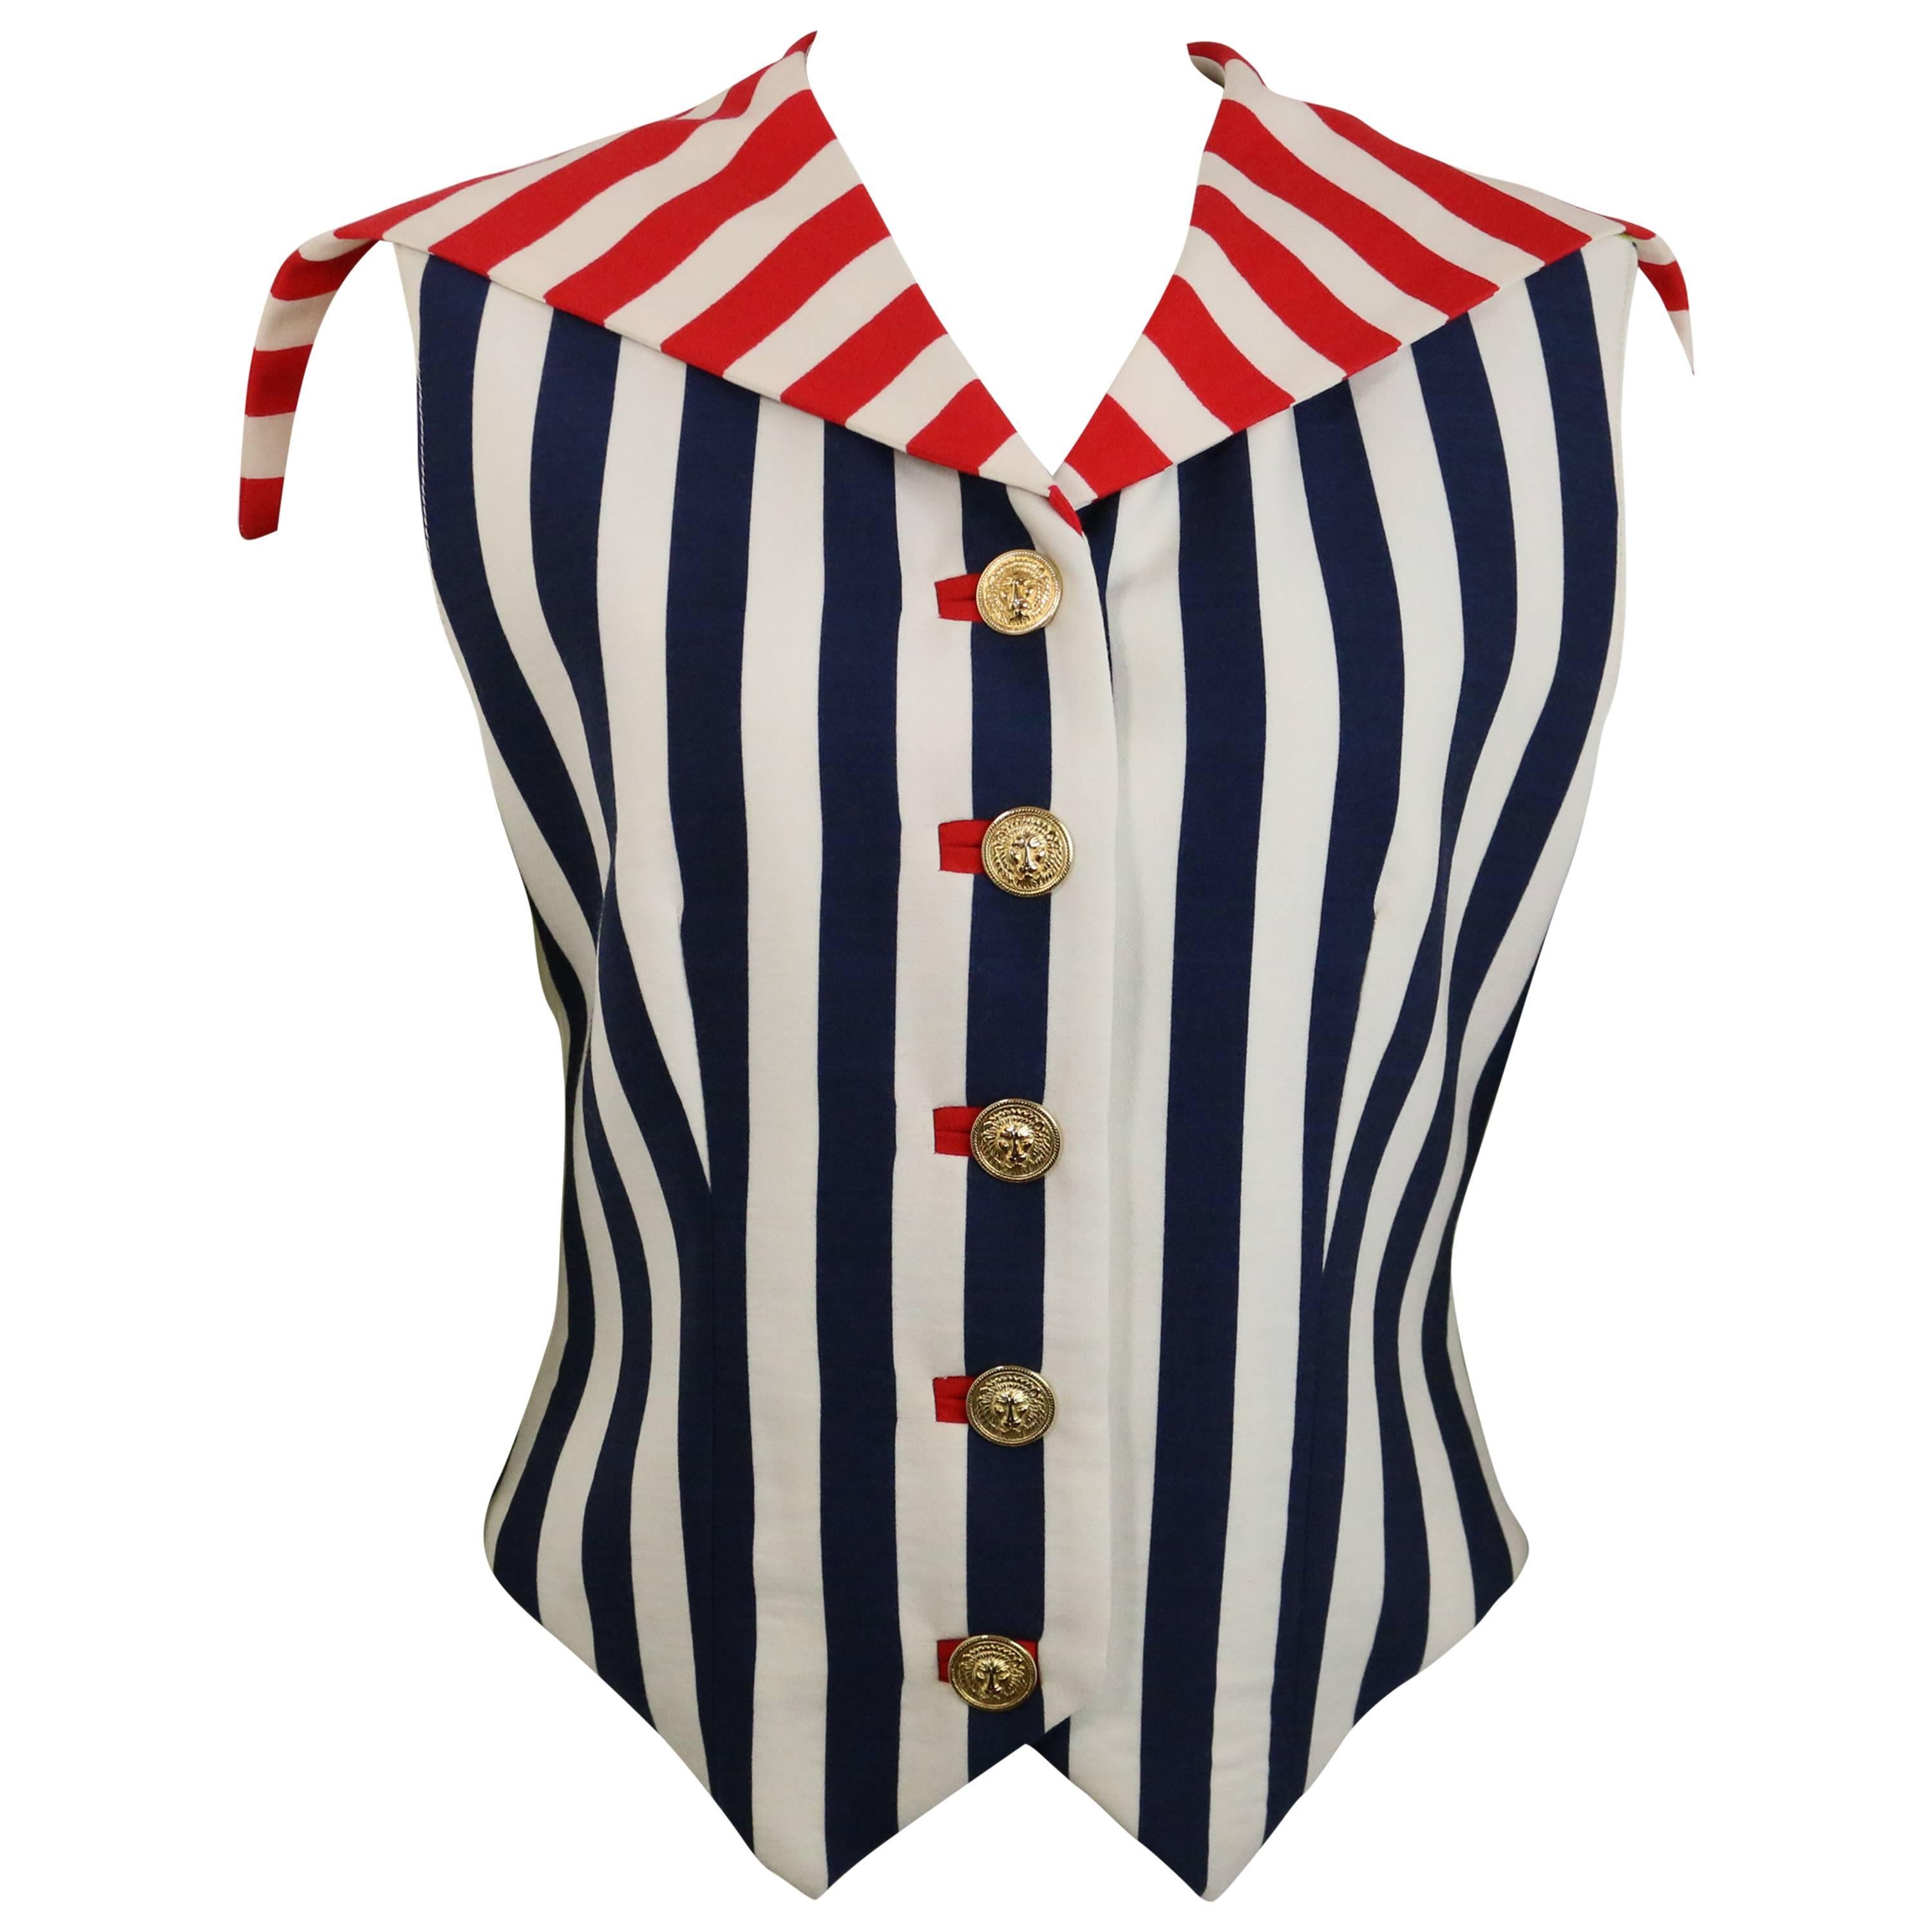  Versus By Gianni Versace Colour Blocked Stripes Cropped Vest  For Sale